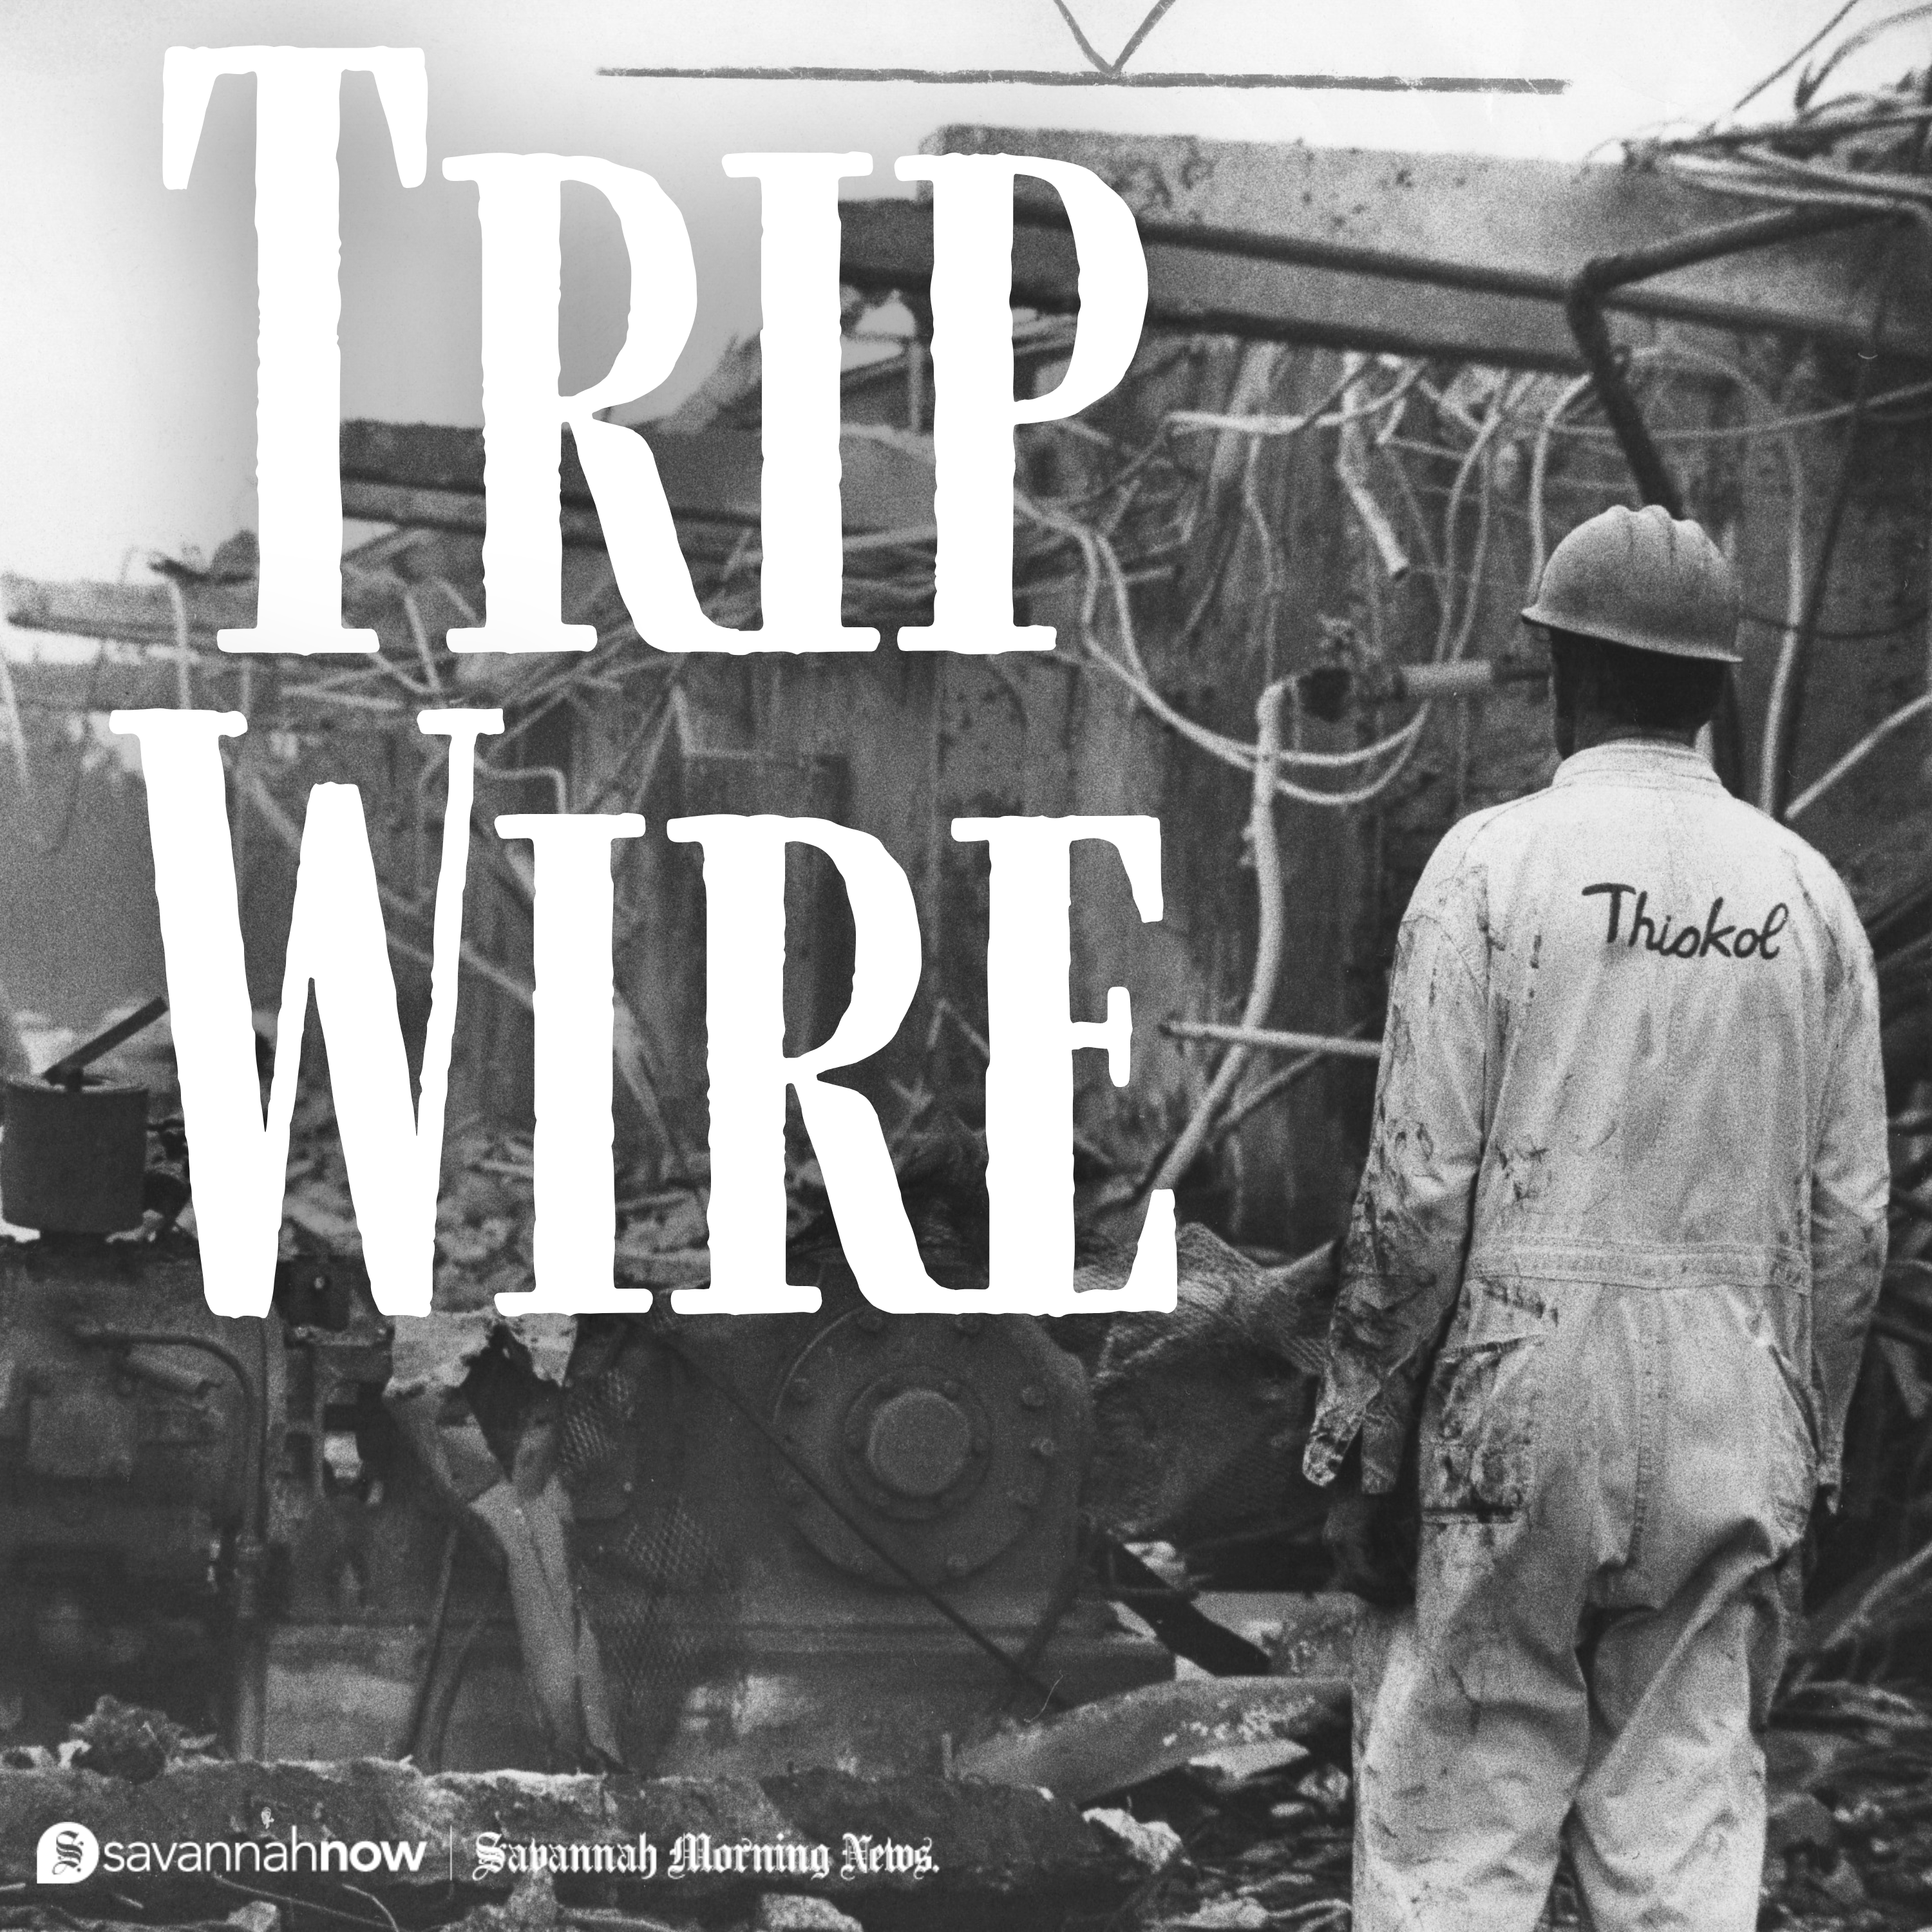 Introducing Tripwire, a podcast investigating the 1971 Thiokol chemical explosion